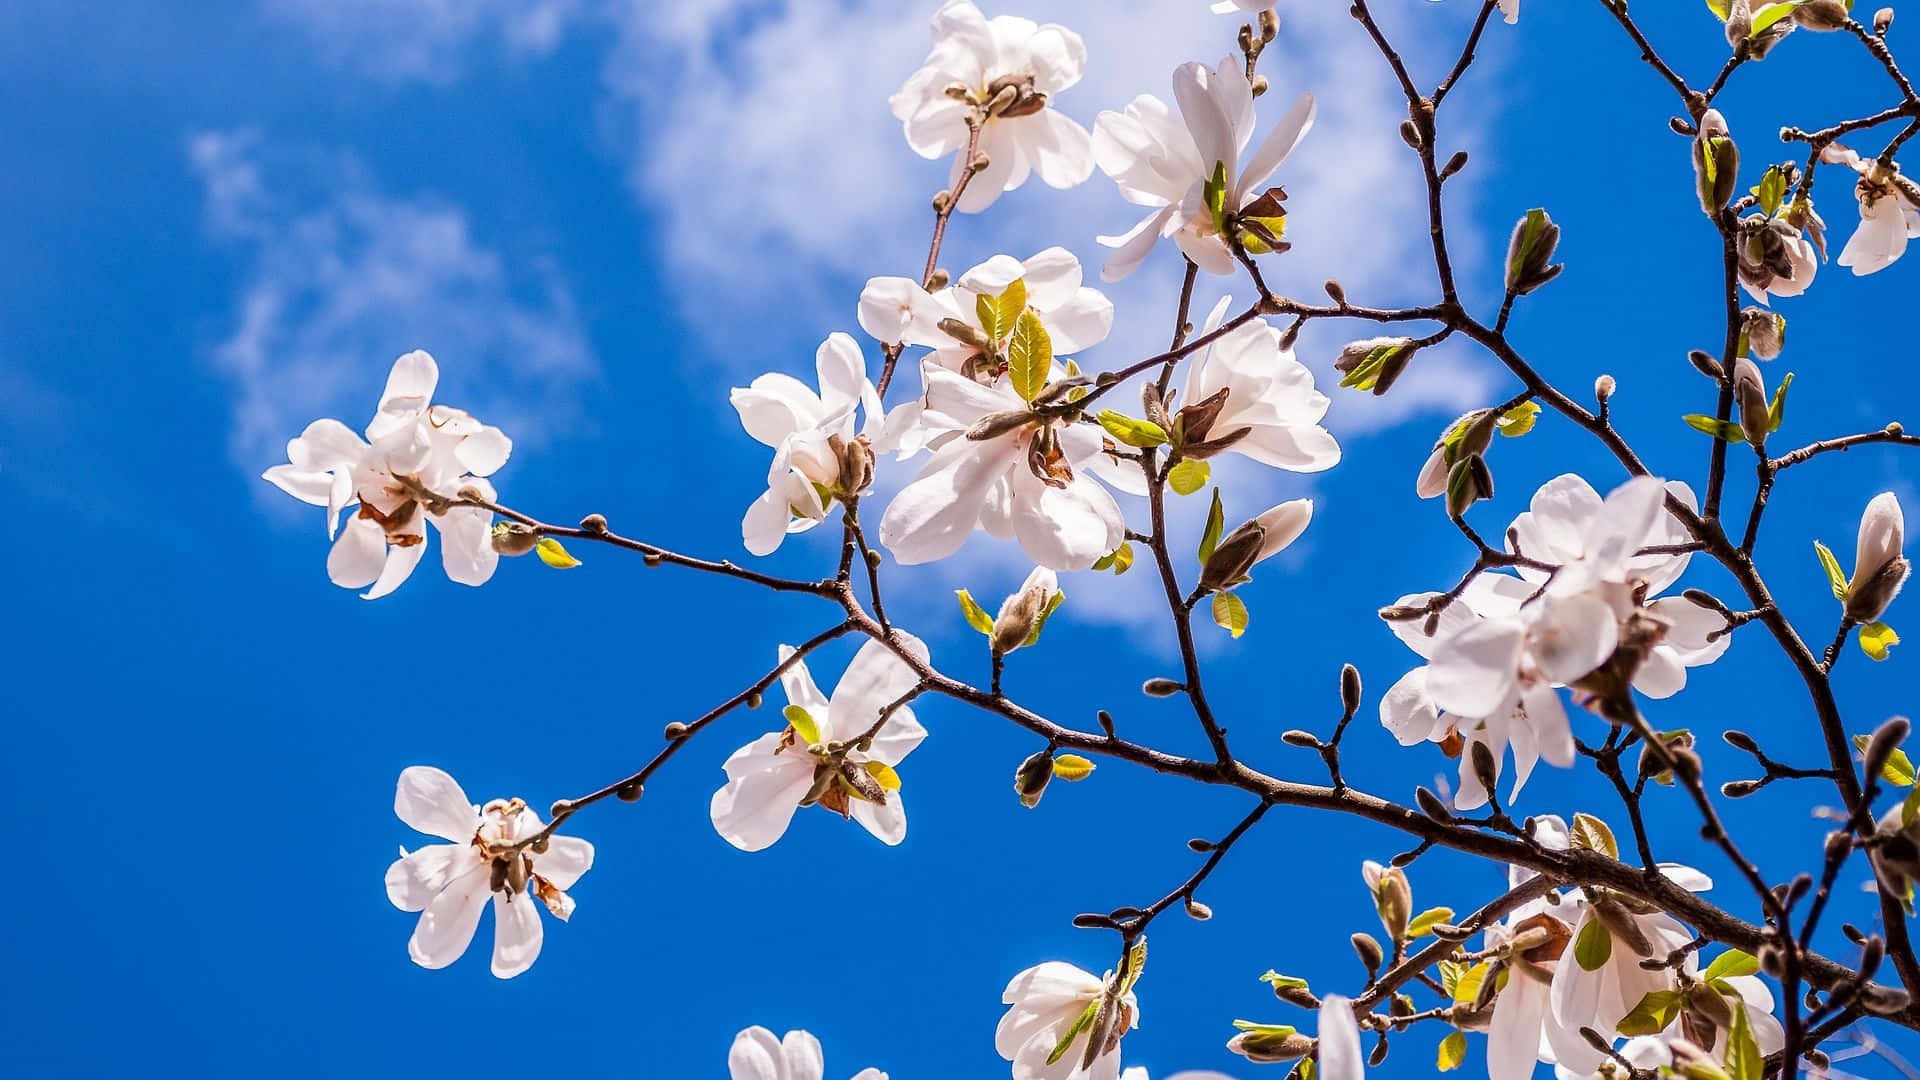 Spring Magnolia Flowers And Blue Sky Wallpaper